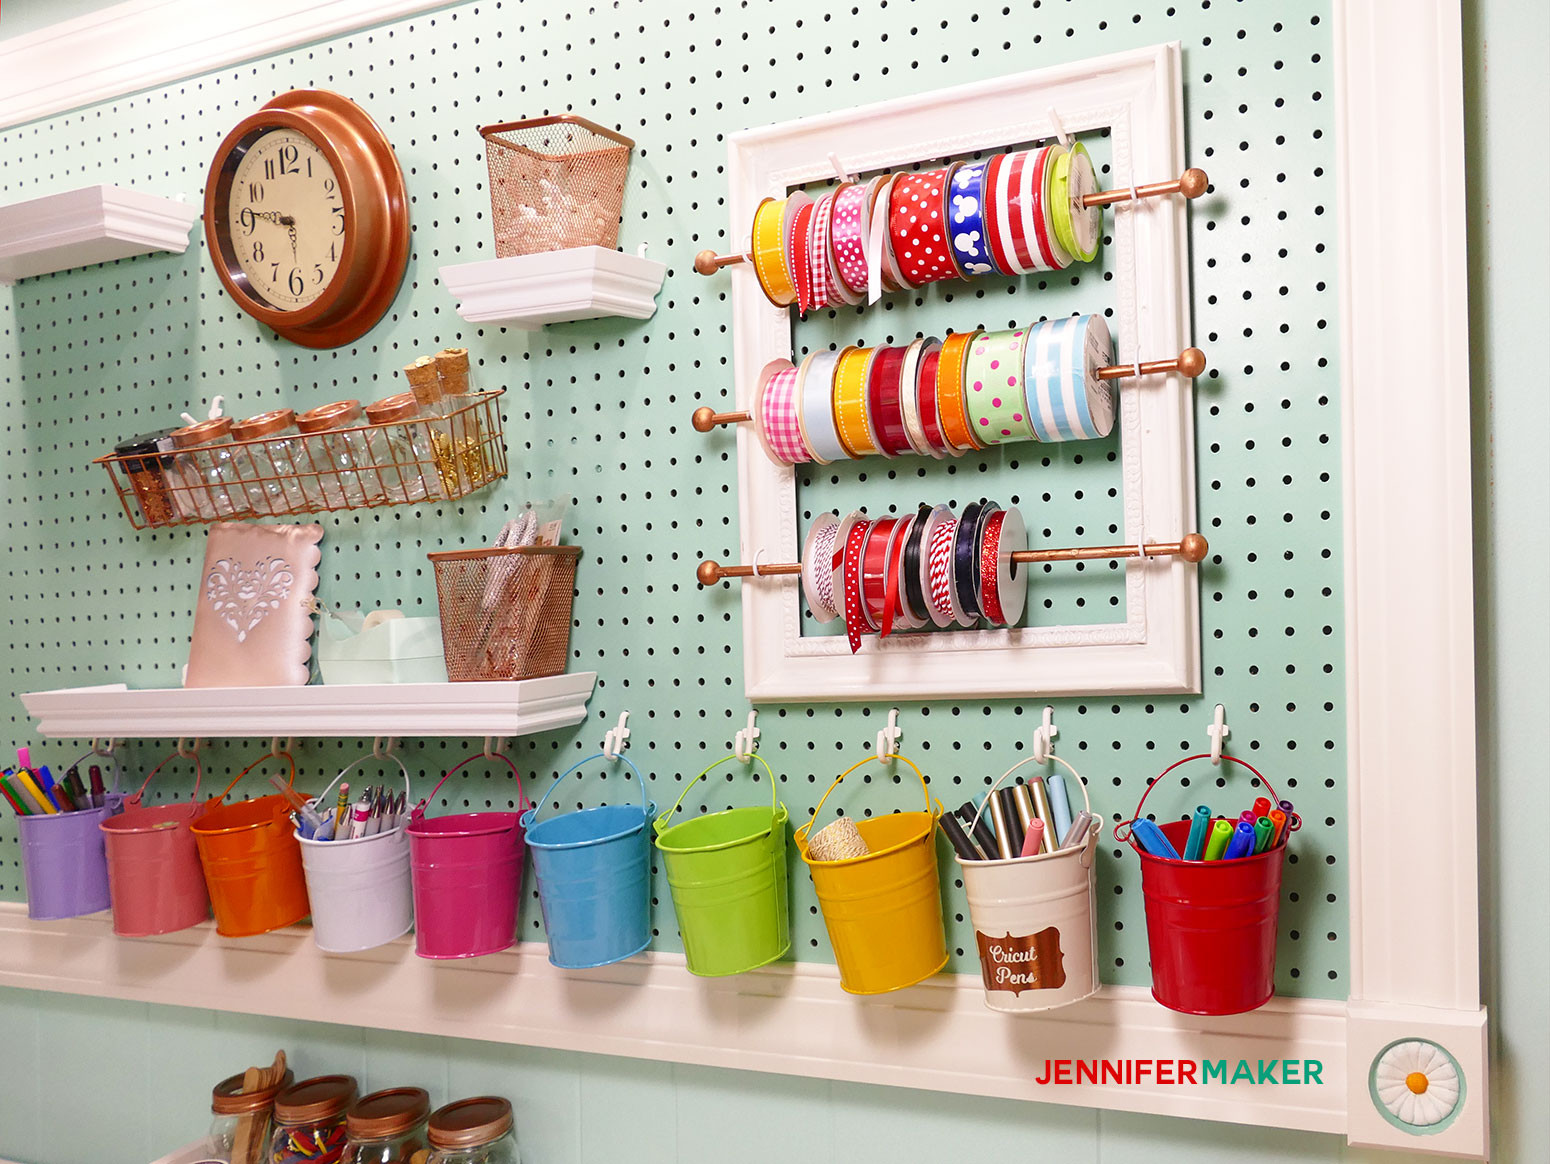 DIY Ribbon Organizer
 DIY Ribbon Organizer Frame Pretty and Functional